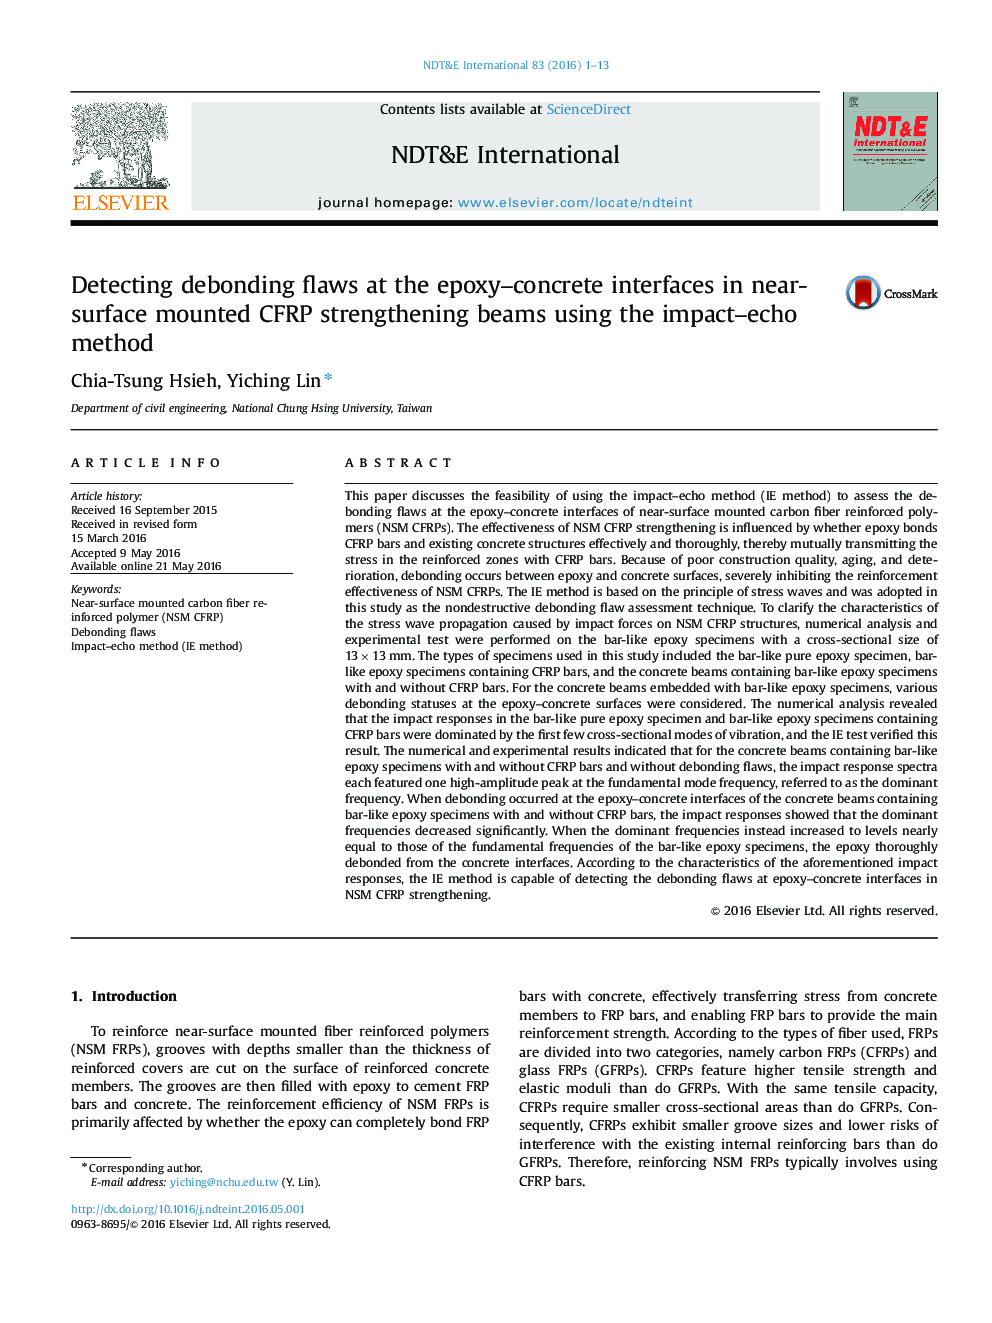 Detecting debonding flaws at the epoxy–concrete interfaces in near-surface mounted CFRP strengthening beams using the impact–echo method